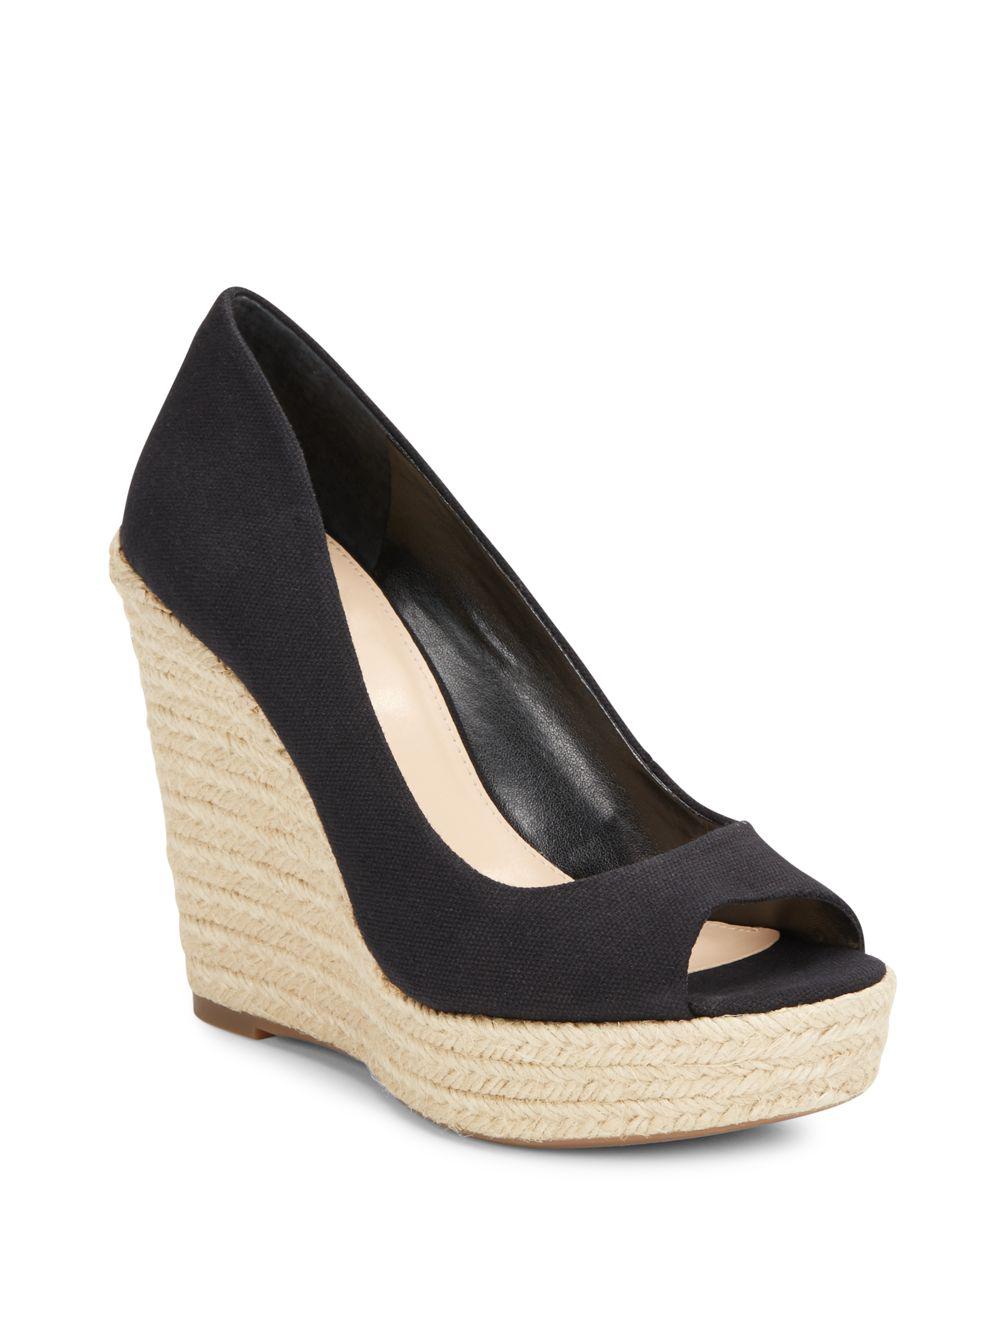 Vince Camuto Totsi Espadrille Wedge Sandals in Black - Lyst